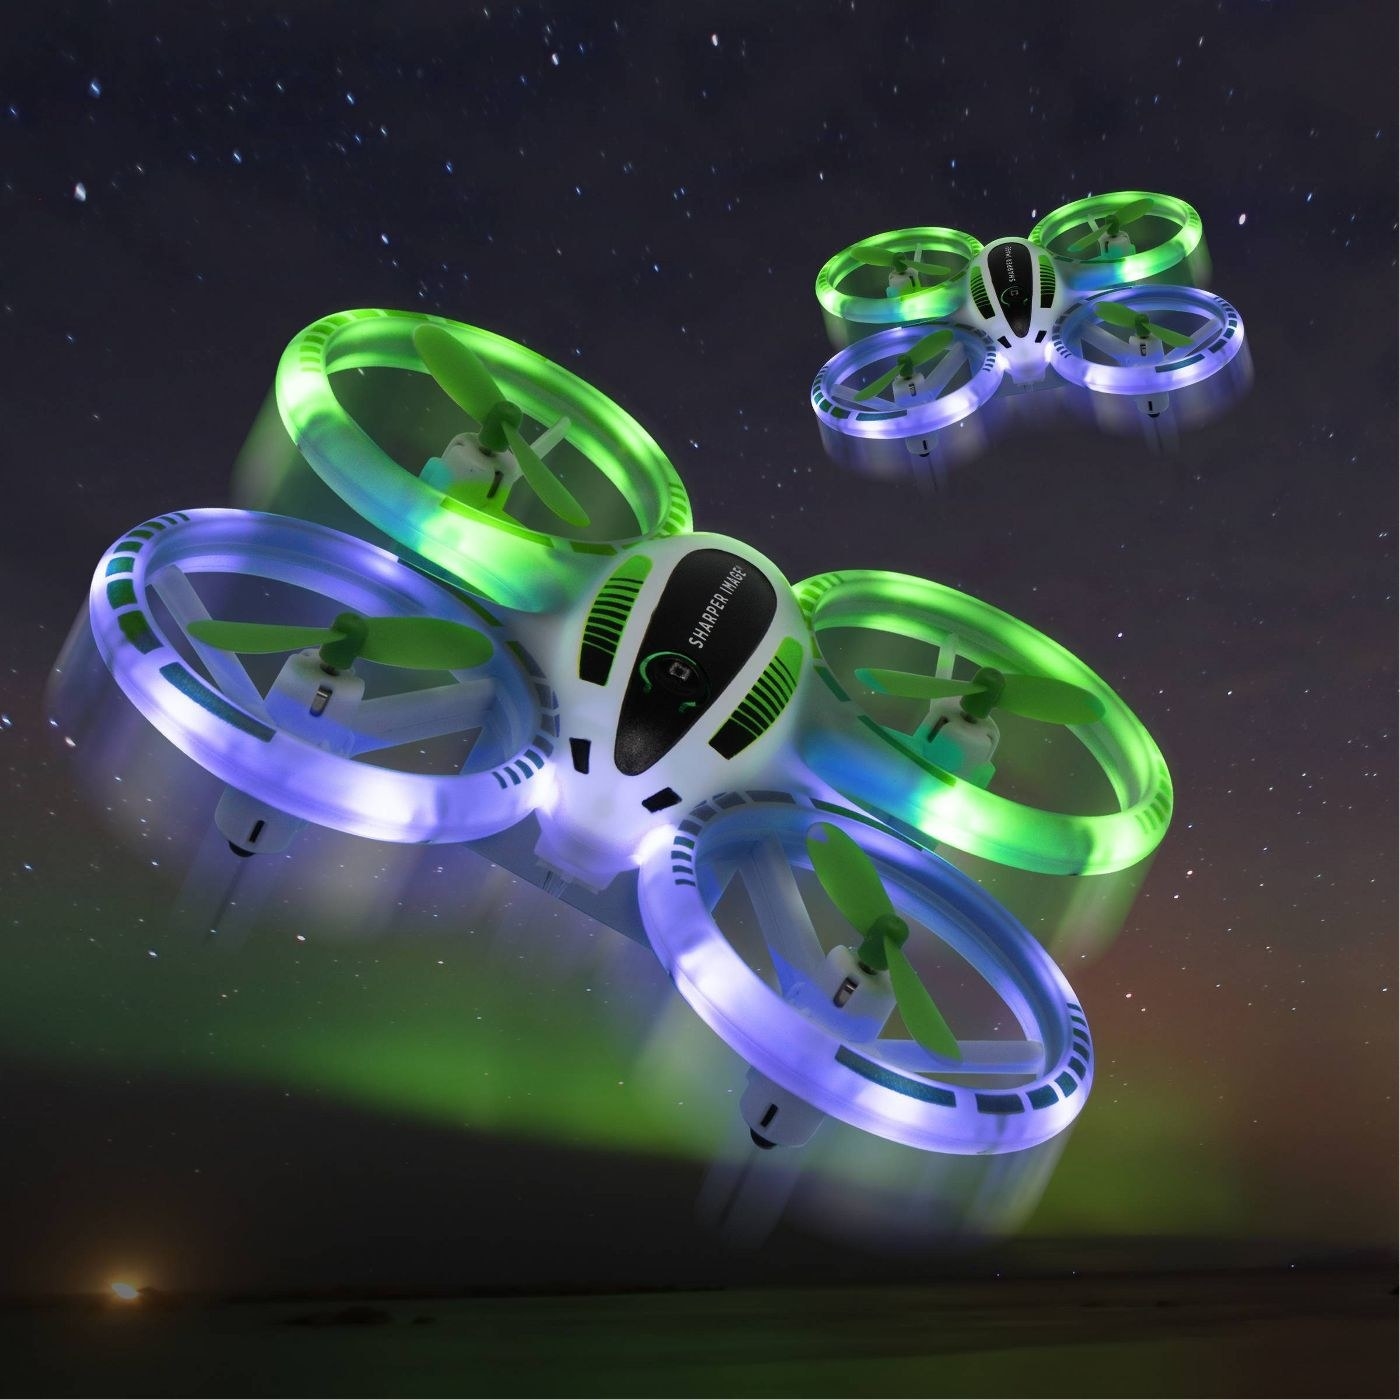 A light-up drone flying at night